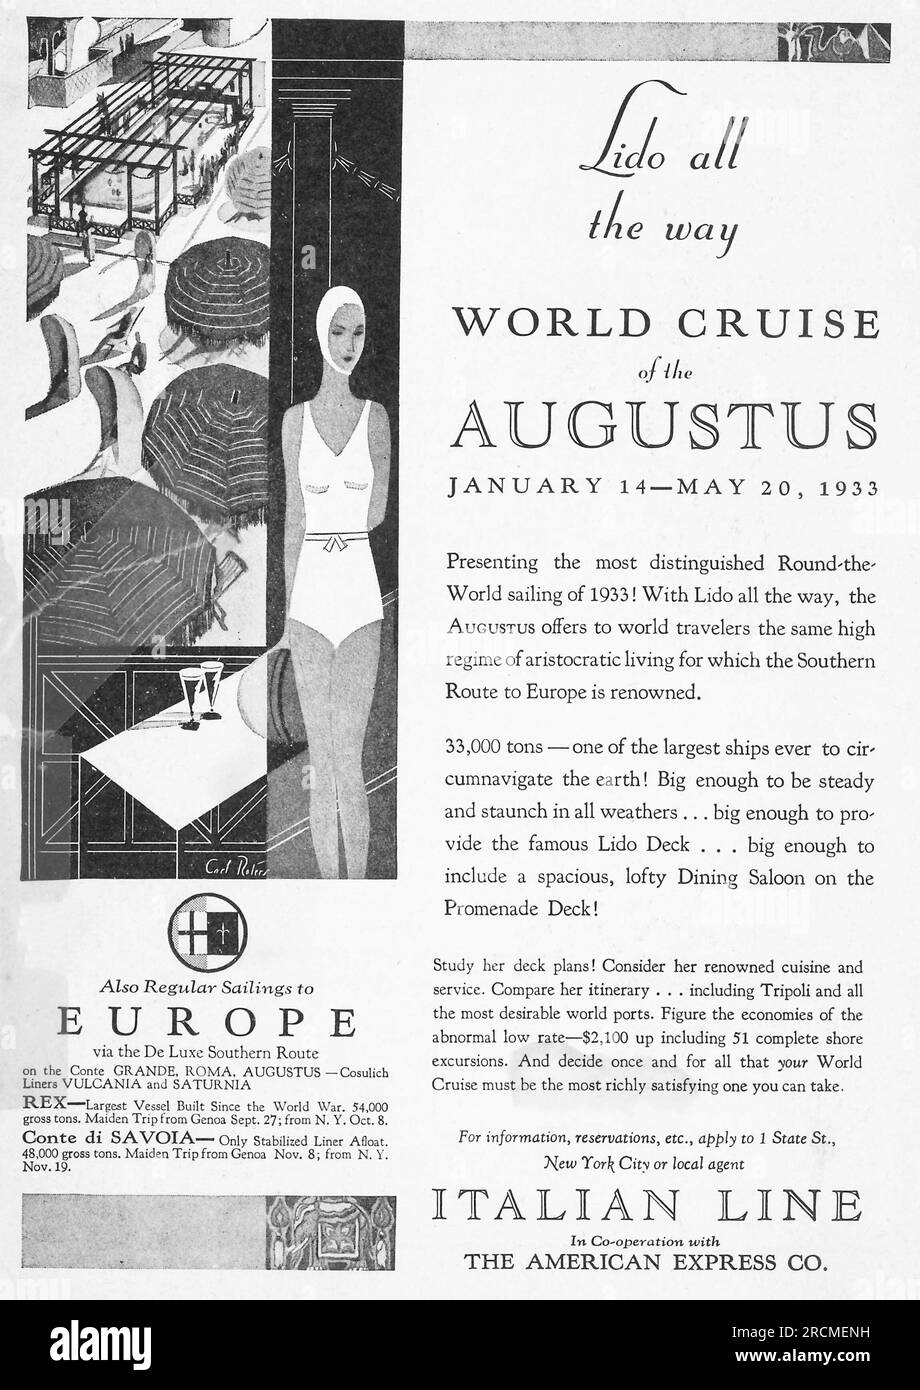 World Round-the-World Cruise of the Augustus - Italian line and the American Express from NYC advert in a magazine August 1932 Stock Photo